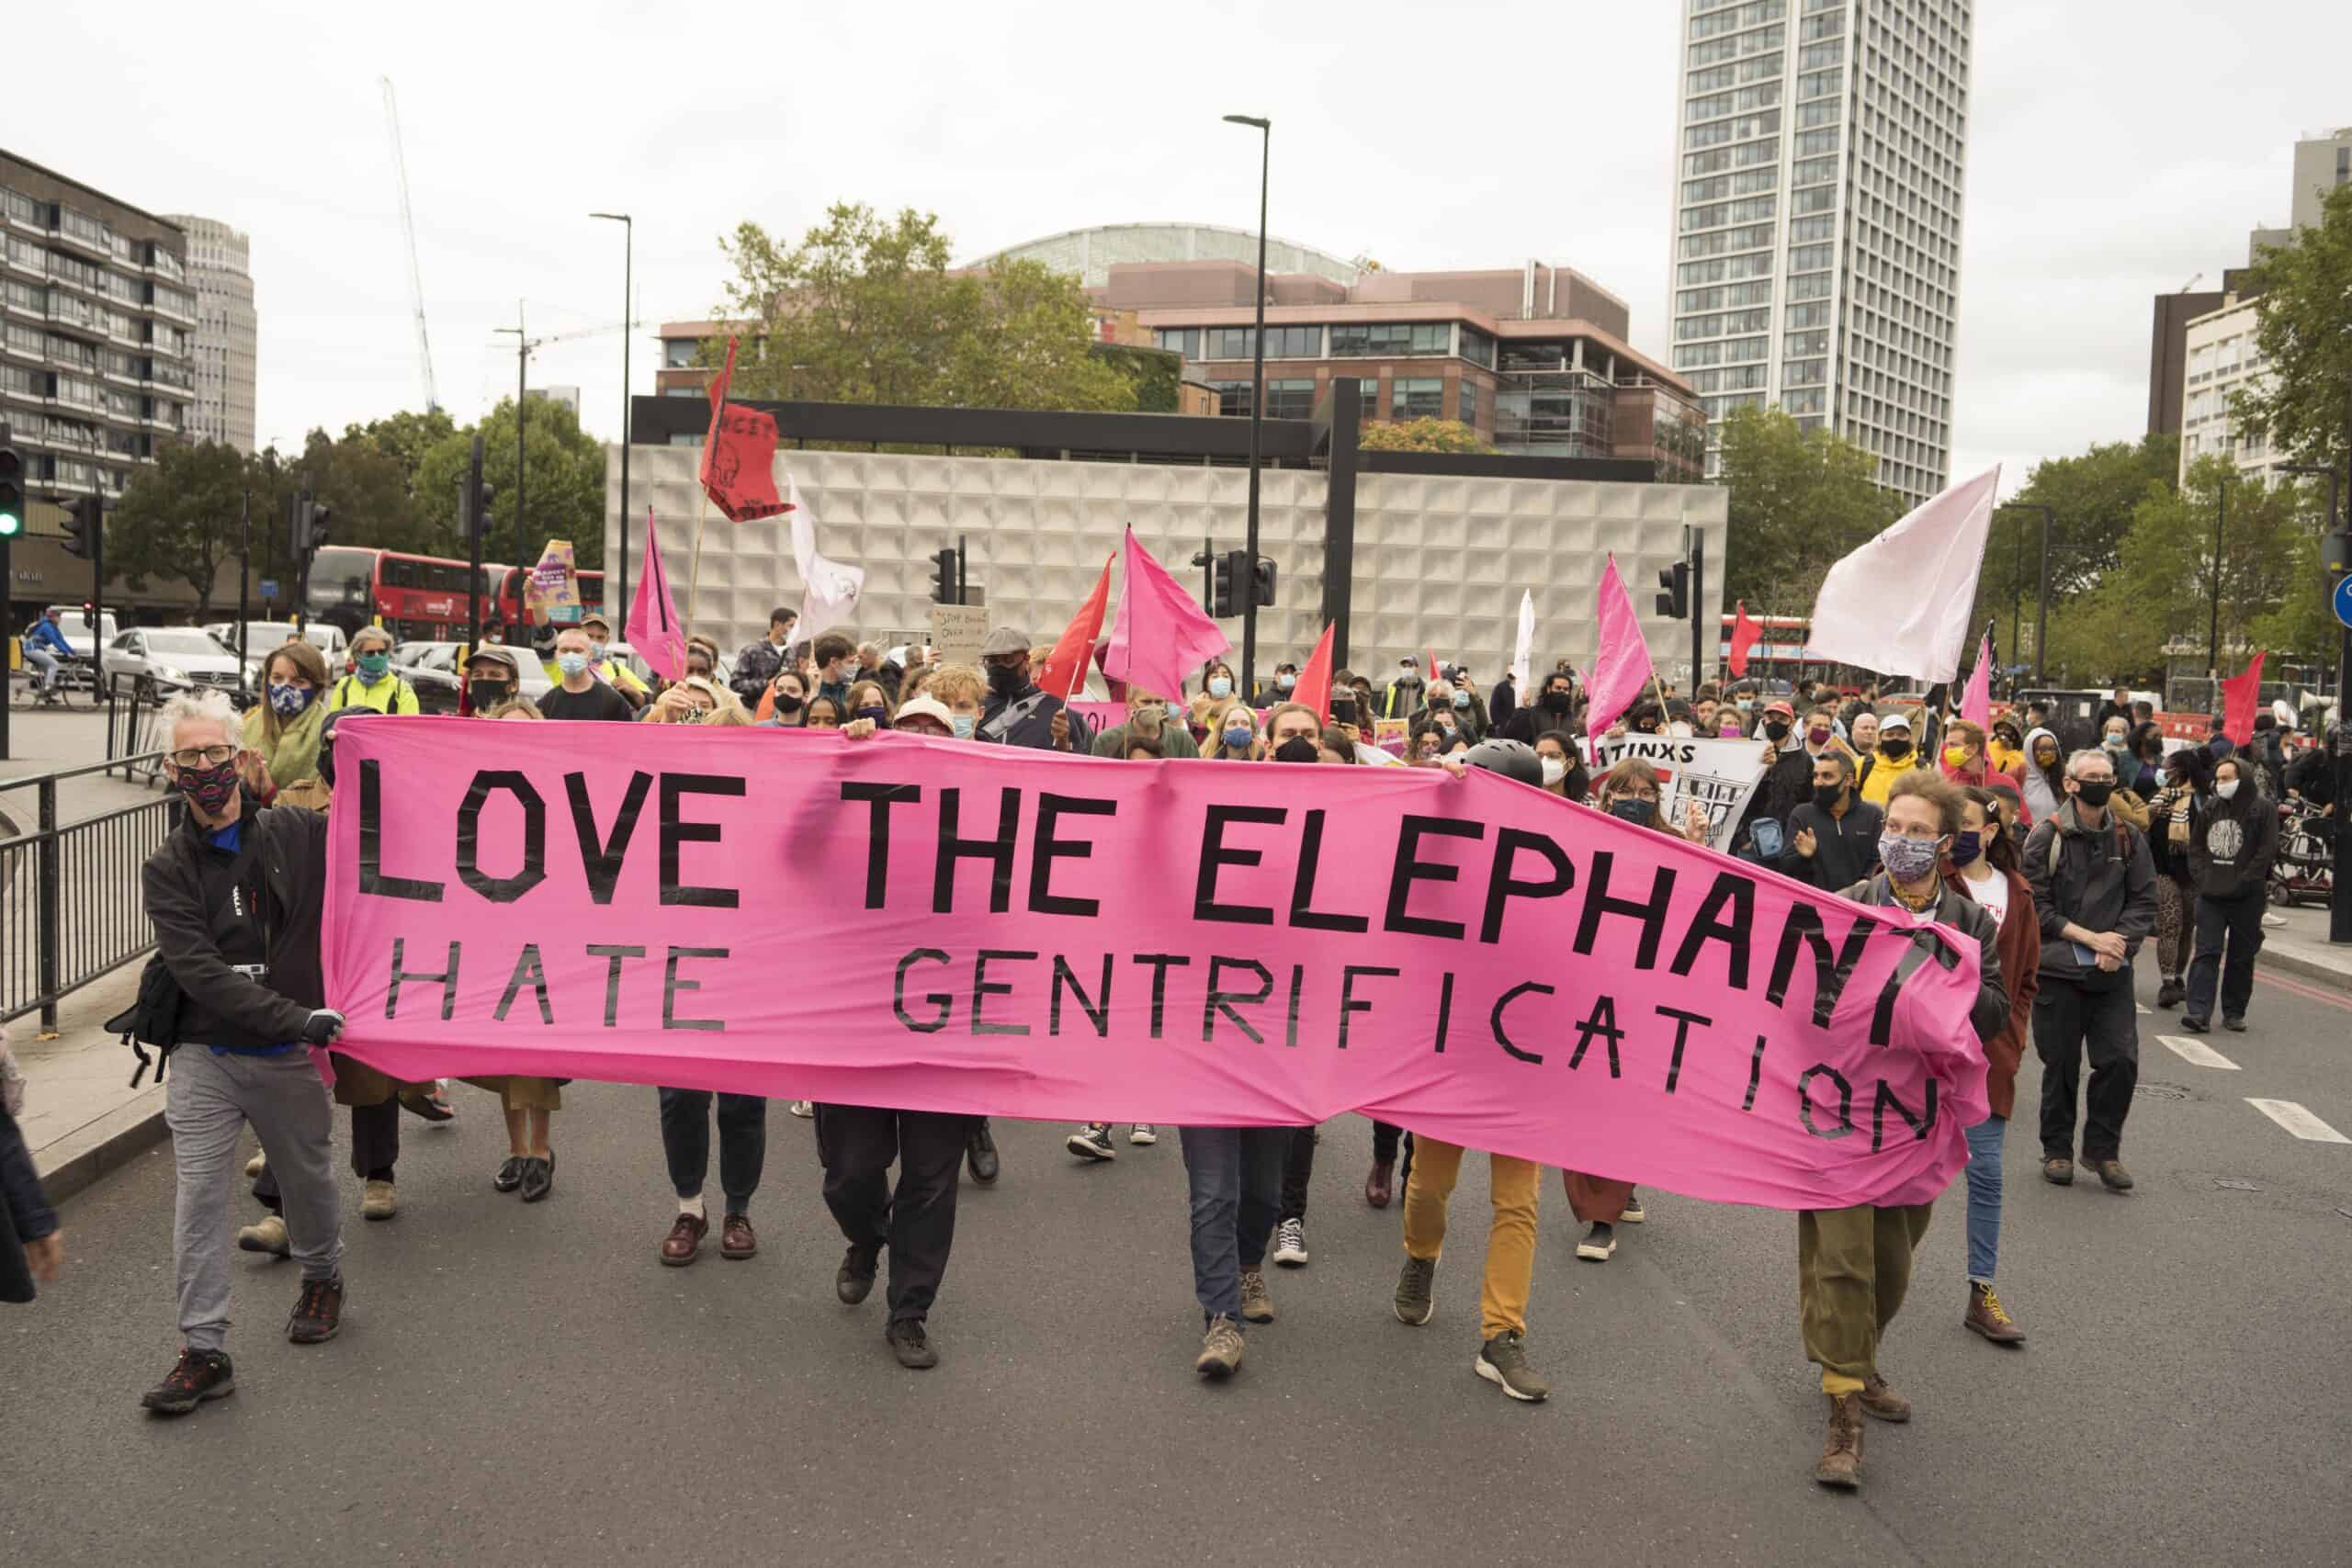 A demonstration outside Elephant and castle shopping centre in its last week of trading, September 2020 (c) Sebastian Garraway